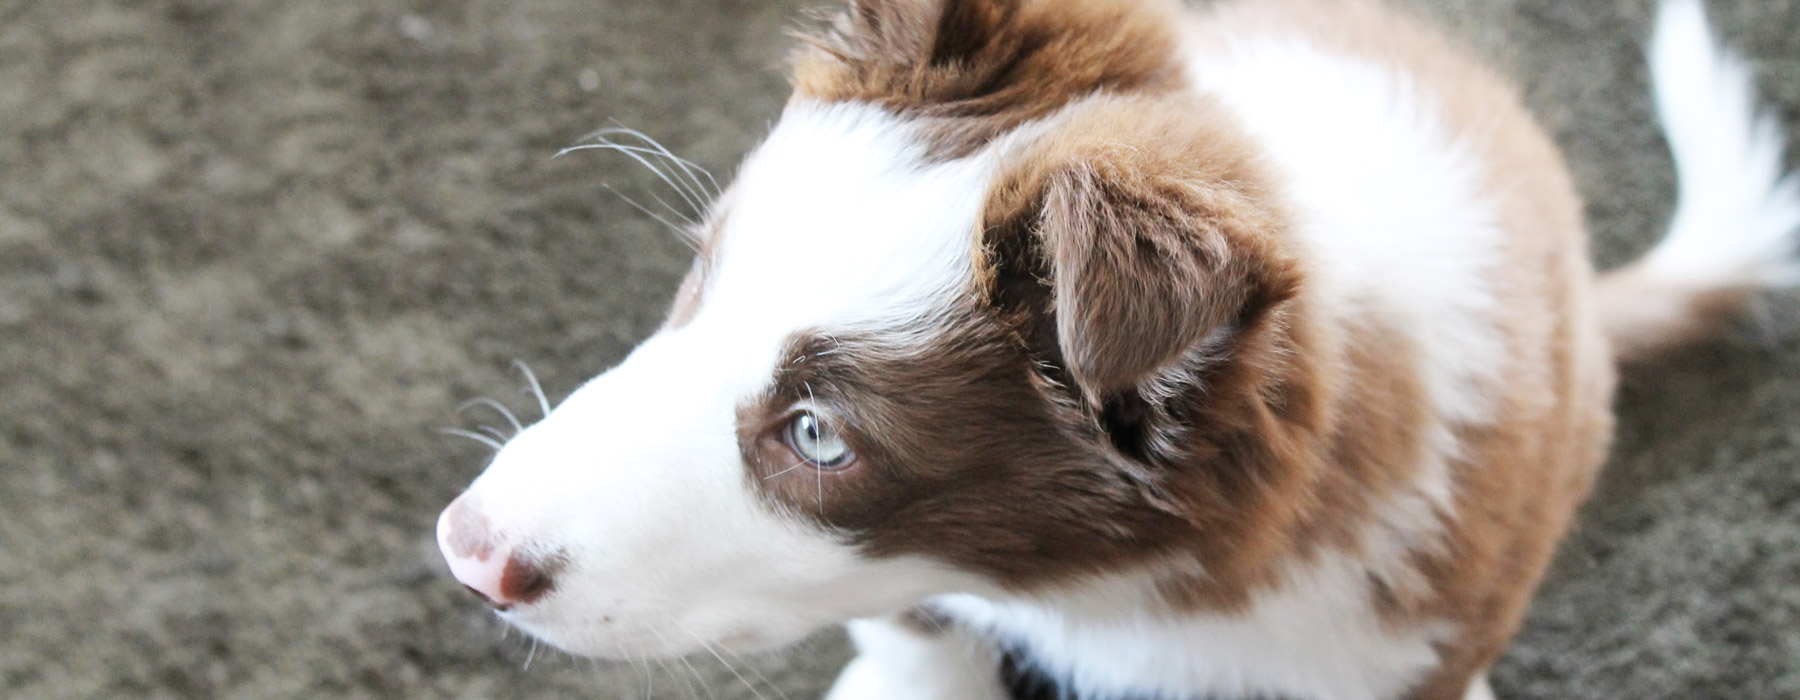 Puppy with brown and white fur and bright grey eyes looking at something.